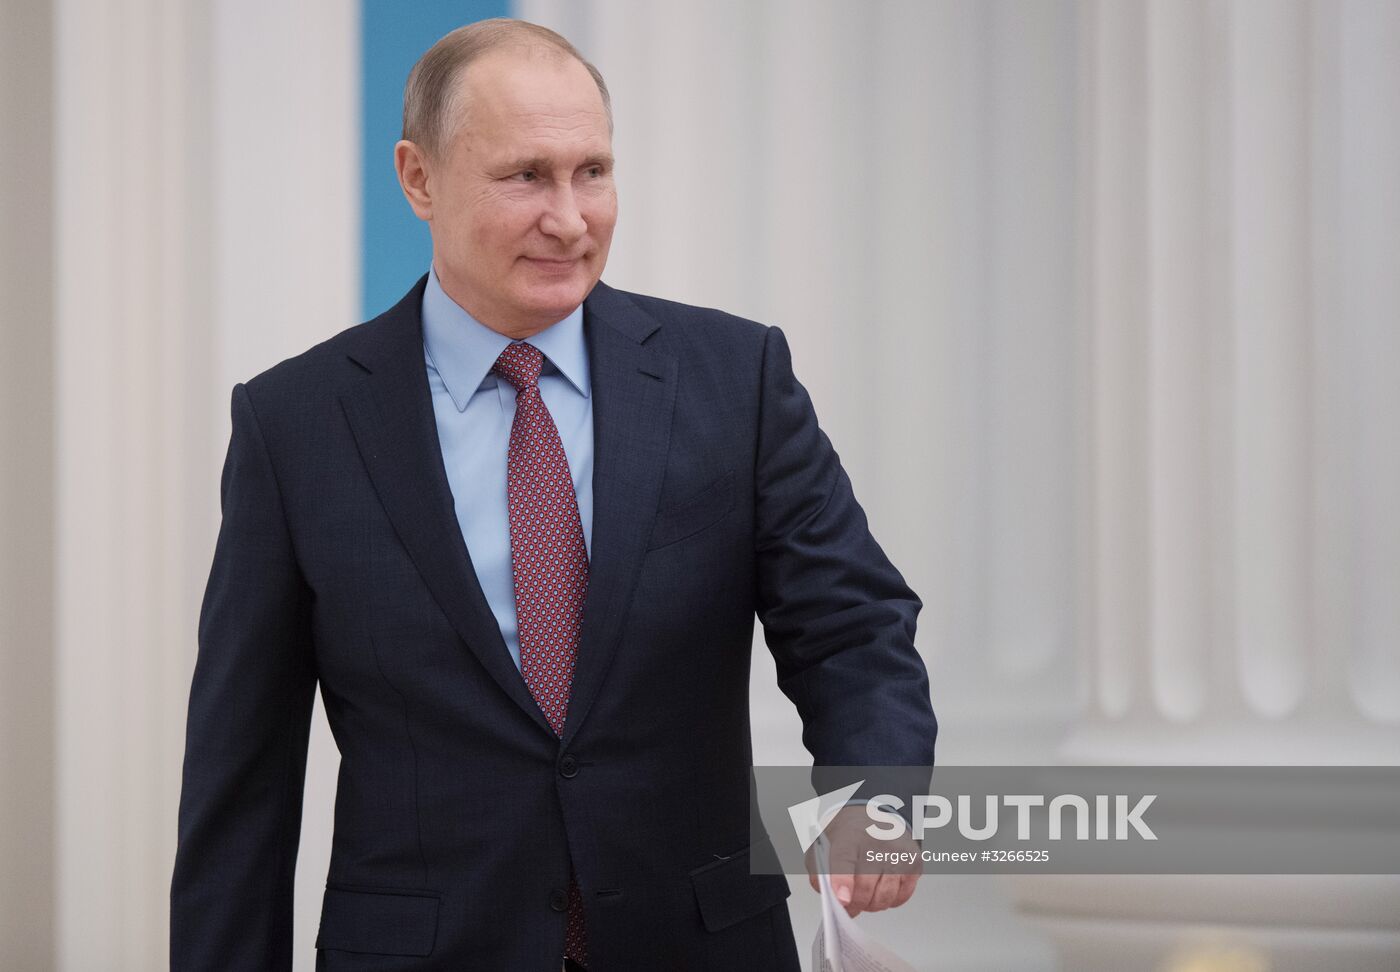 President Vladimir Putin meets with leadership of Federal Assembly's chambers